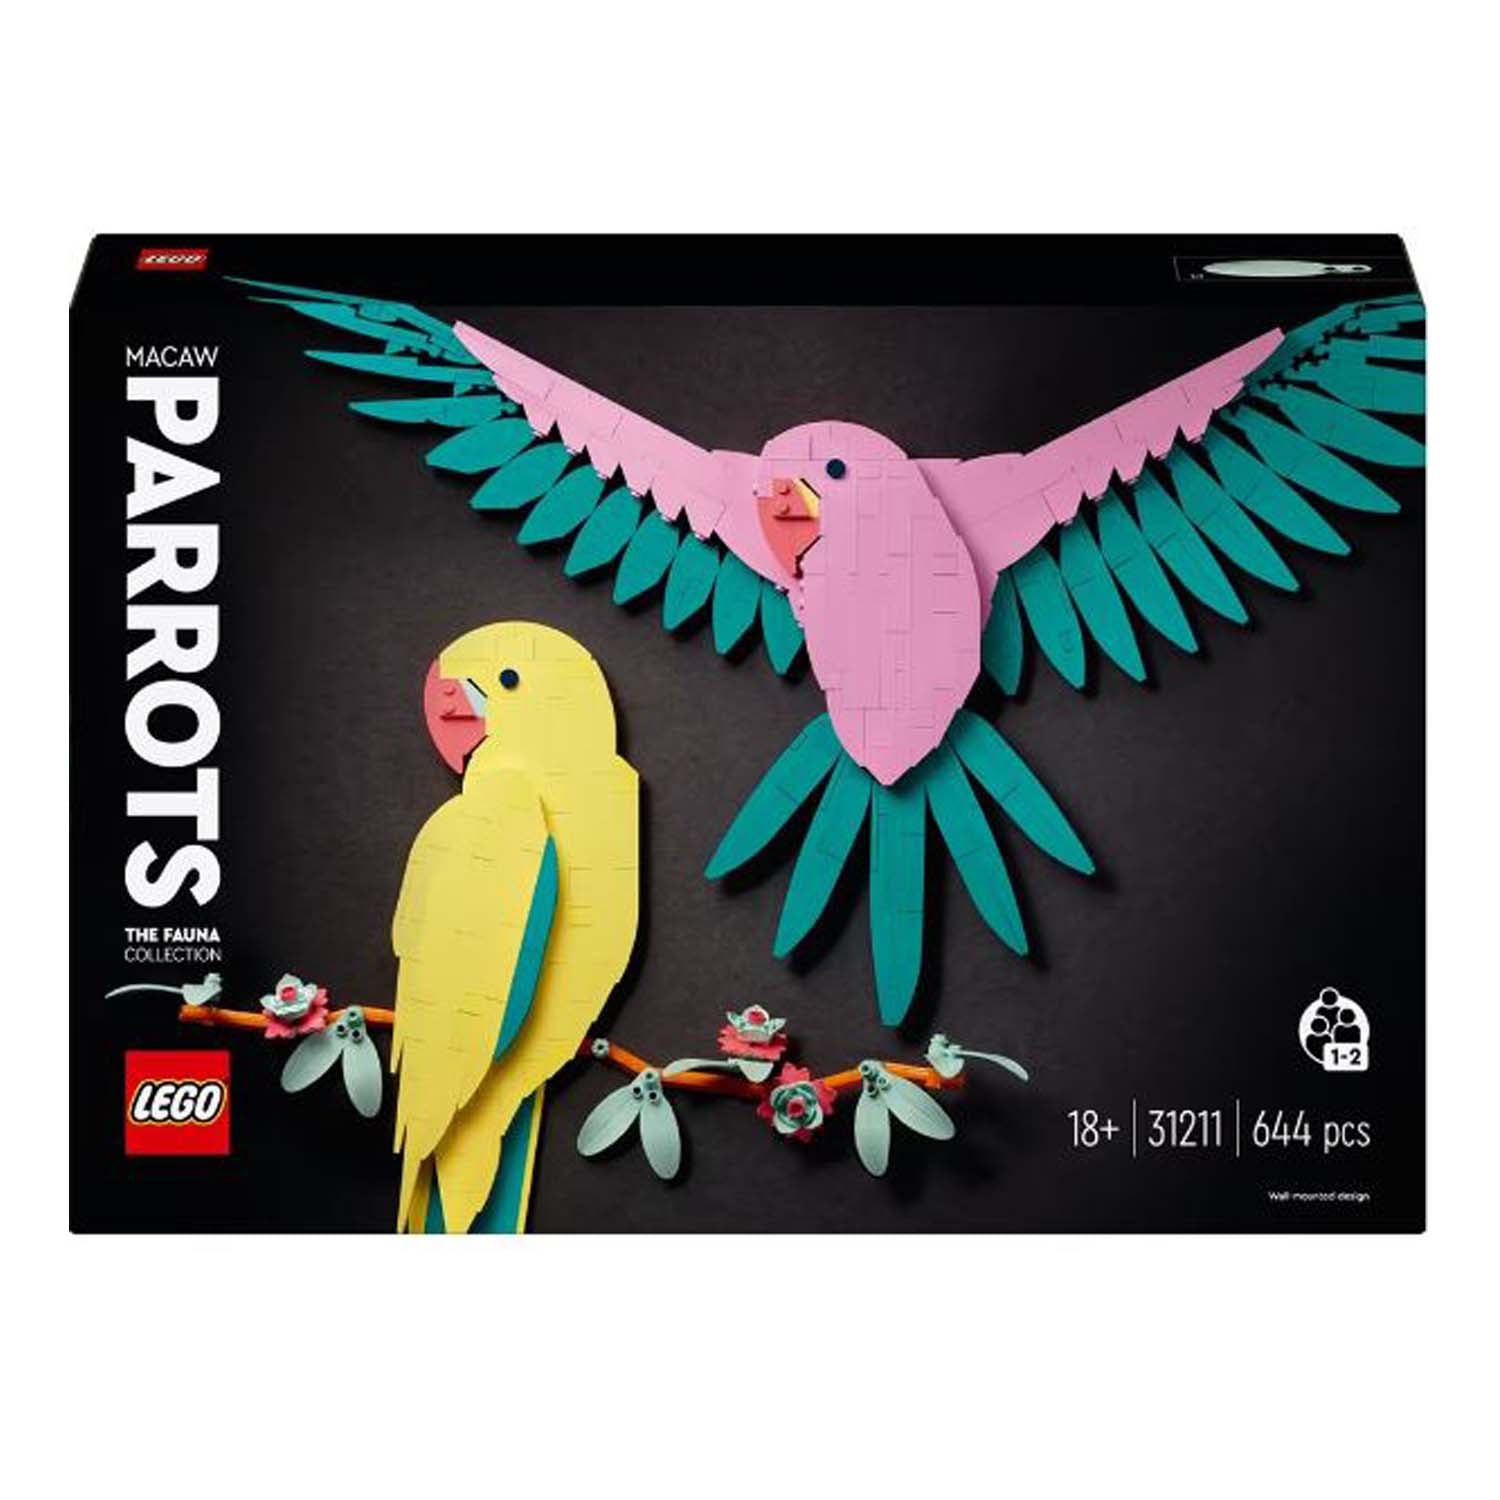 Lego Creator 3 In 1 Exotic Parrot Animals Building Toy 31136 : Target